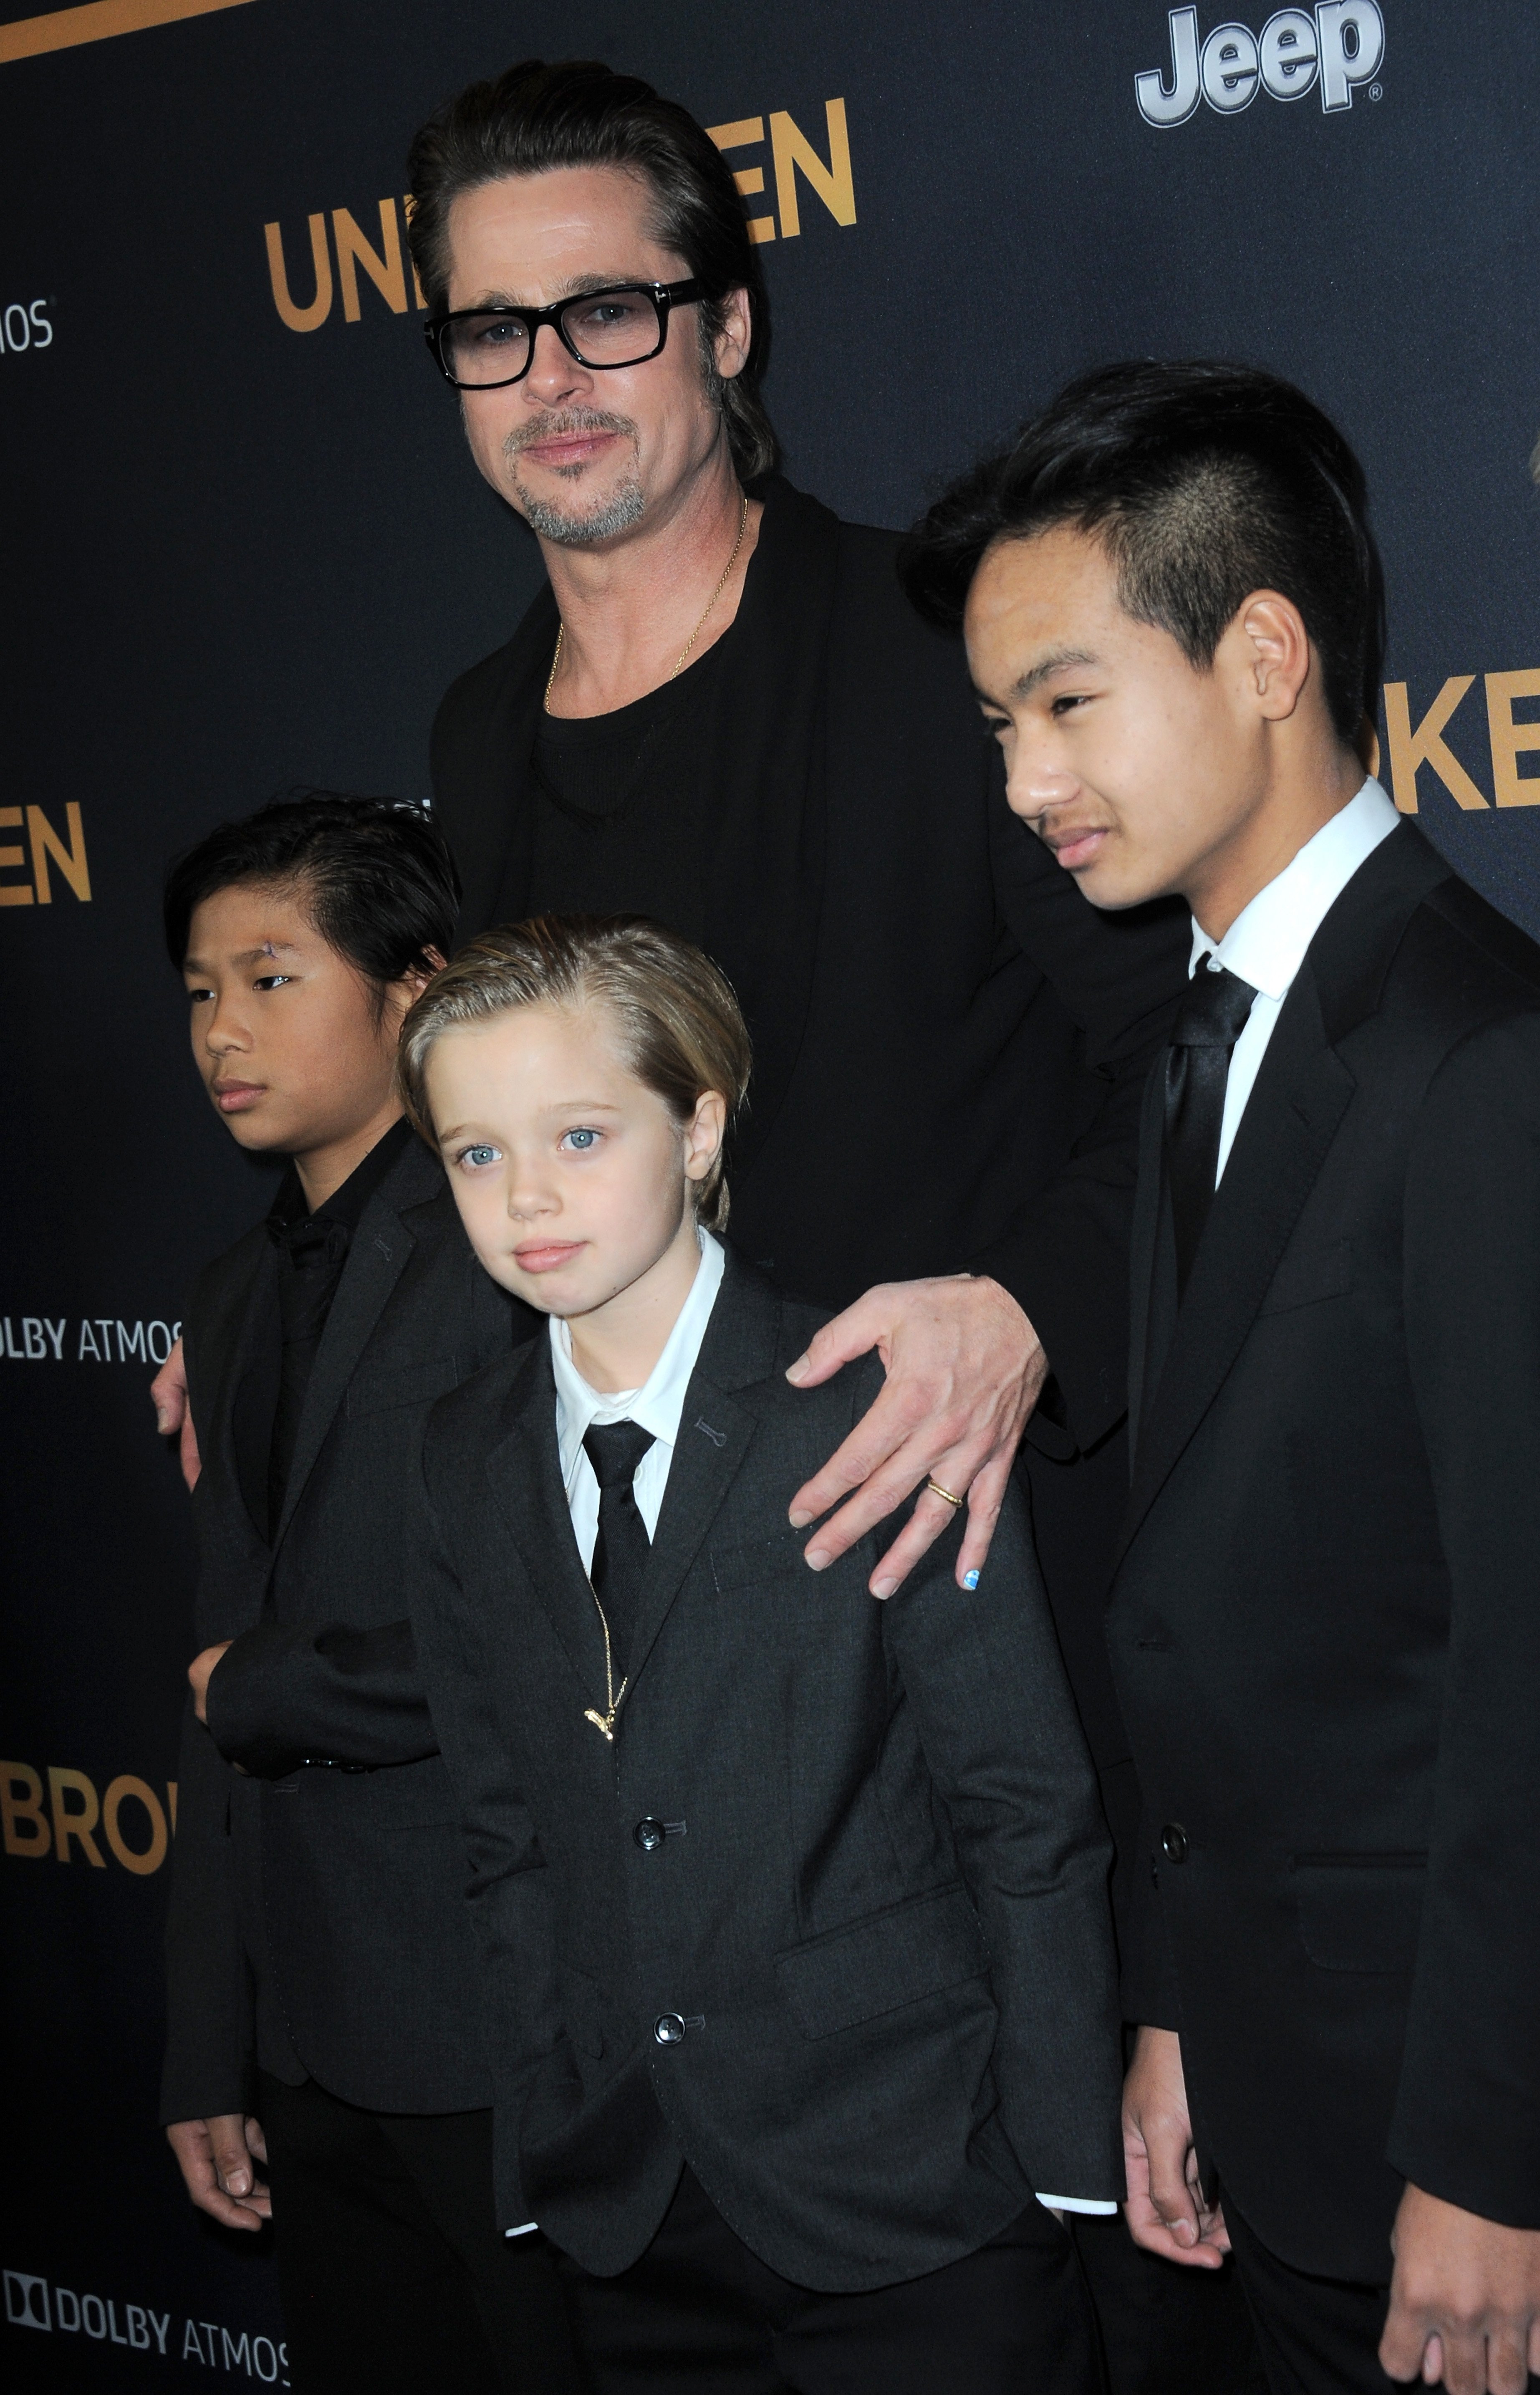 Brad Pitt,\\u00a0Pax, Shiloh, and Maddox Jolie-Pitt at\\u00a0the premiere of\\u00a0"Unbroken"\\u00a0on December 15, 2014, in Hollywood, California | Source: Getty Images